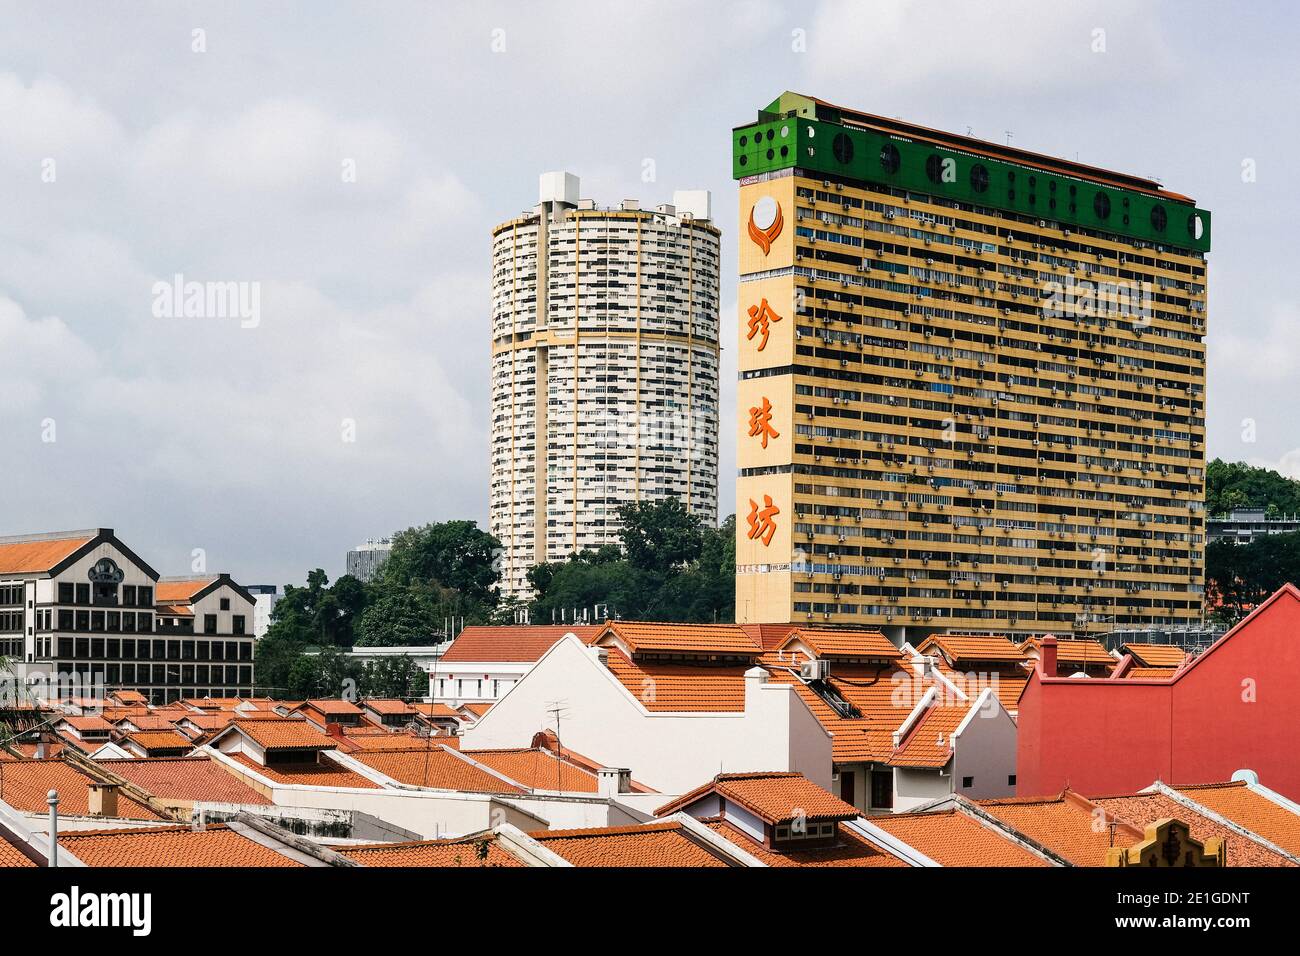 Peoples Park Plaza & Pearl Bank Apartments, towering above the vincinity shophouses in Chinatown, Singapore. Stock Photo